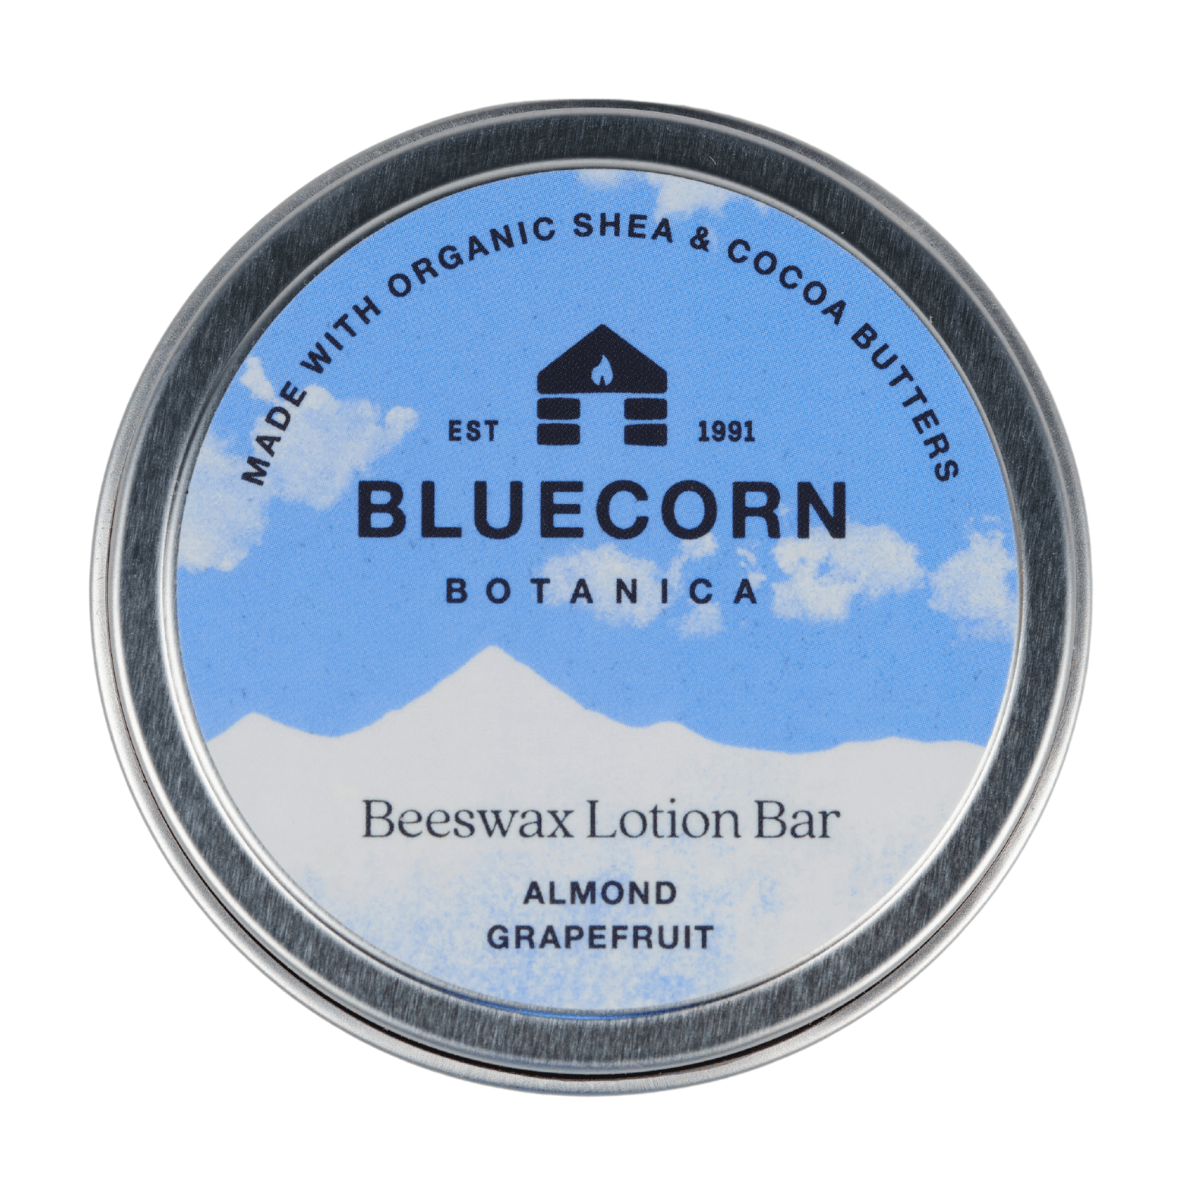 Bluecorn Botanica Beeswax Lotion Bar in Almond Grapefruit. Made with Organic Shea Butter, Organic Cocoa Butter, Avocado Oil, Apricot Oil, Cappings Beeswax, Essential Oils. Using the warmth of your hands, these solids bars will turn into lotions. Can be used all over the body and come in a convenient tin. Features blue Bluecorn Botanica Label on aluminum tin with opened lid showing lotion bar. Lotion bar is cream in color and features Bluecorn cabin.